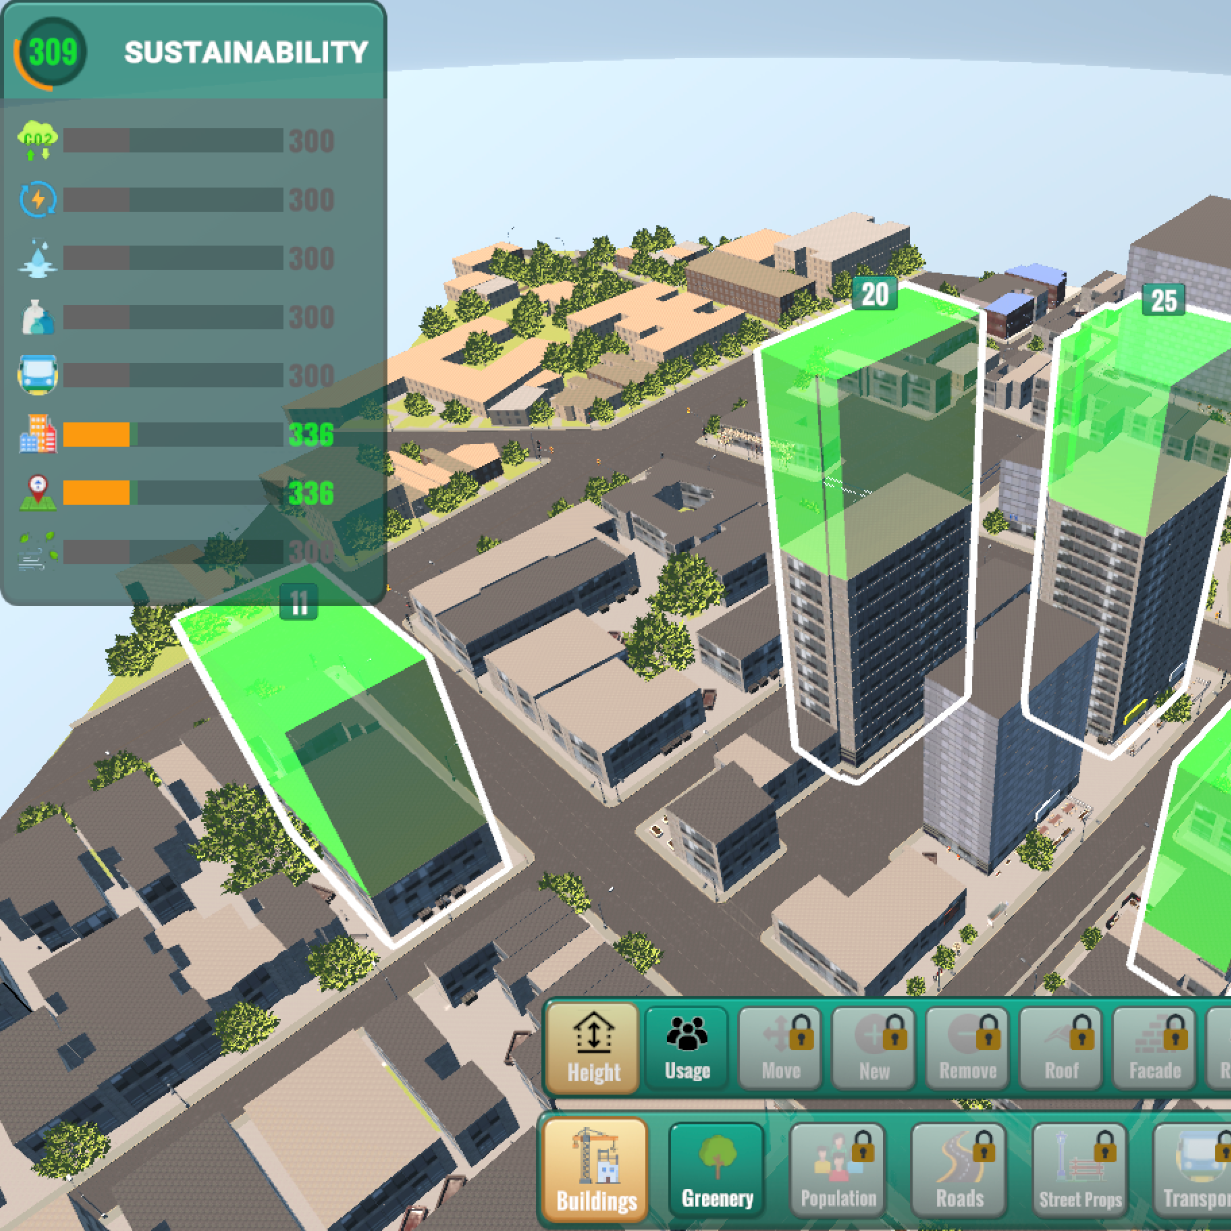 An interactive city planning simulation interface. The screenshot shows a three-dimensional urban layout with various buildings. A sidebar titled 'SUSTAINABILITY' displays metrics like energy, water and waste with corresponding values.